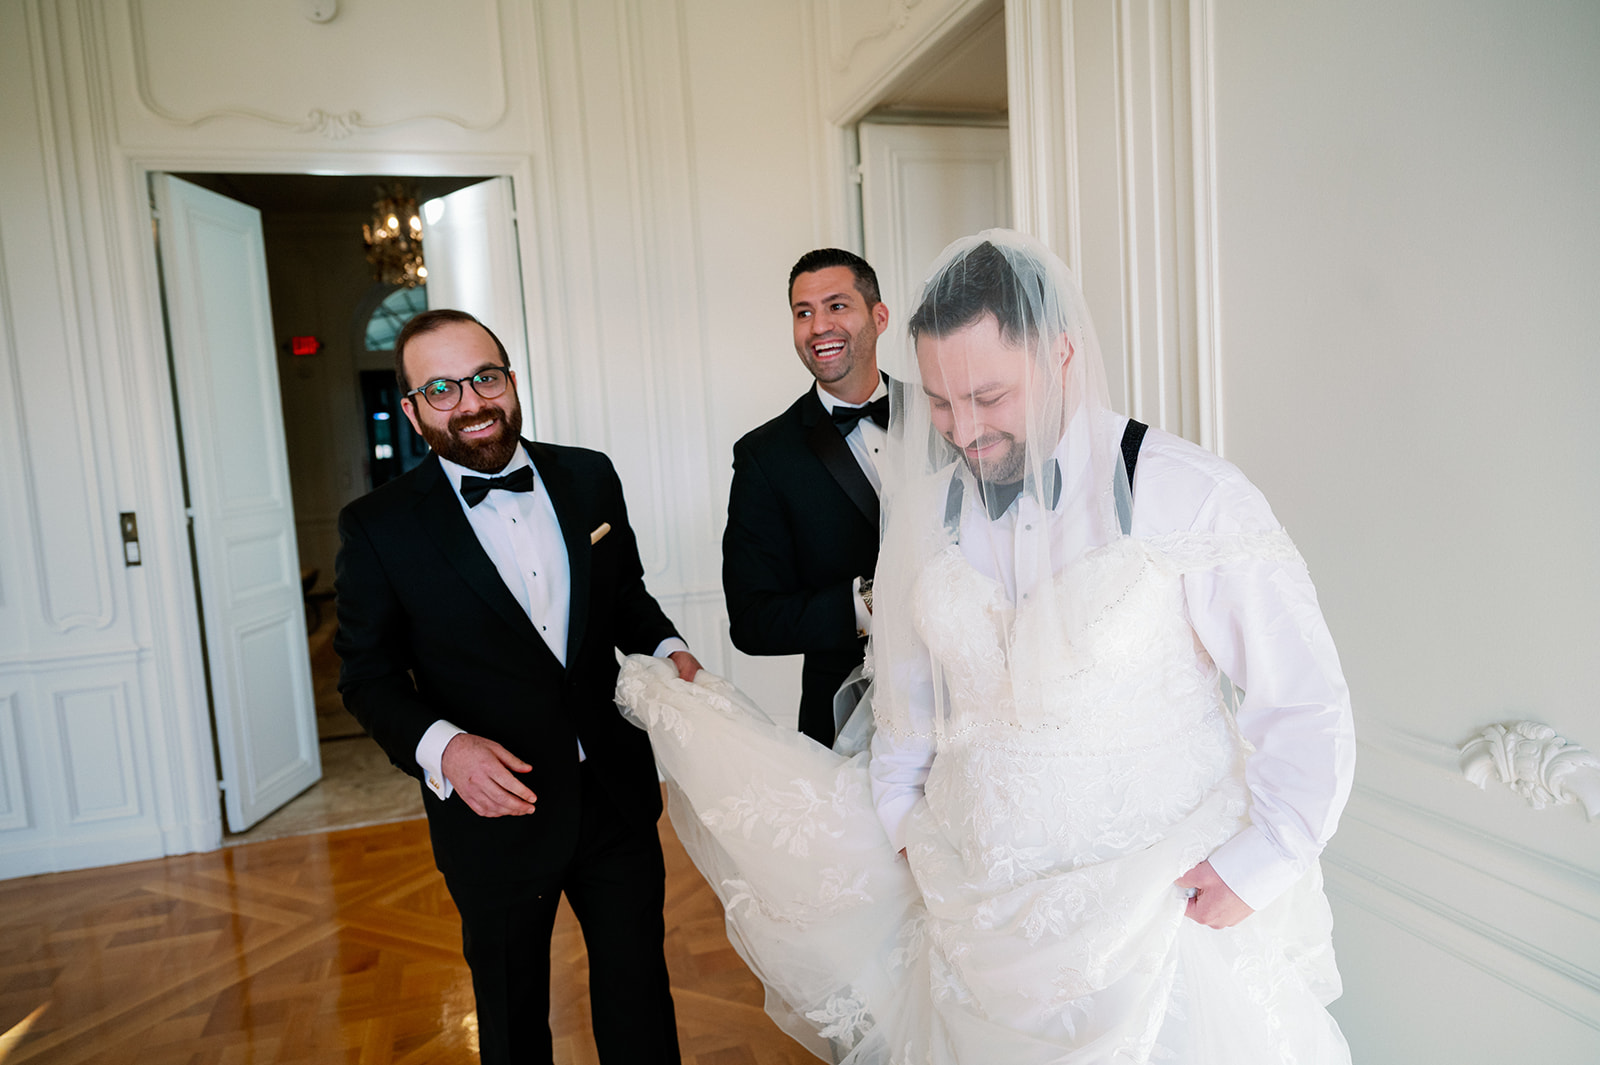 Best man wearing a wedding dress for a surprise "first look" with the groom.